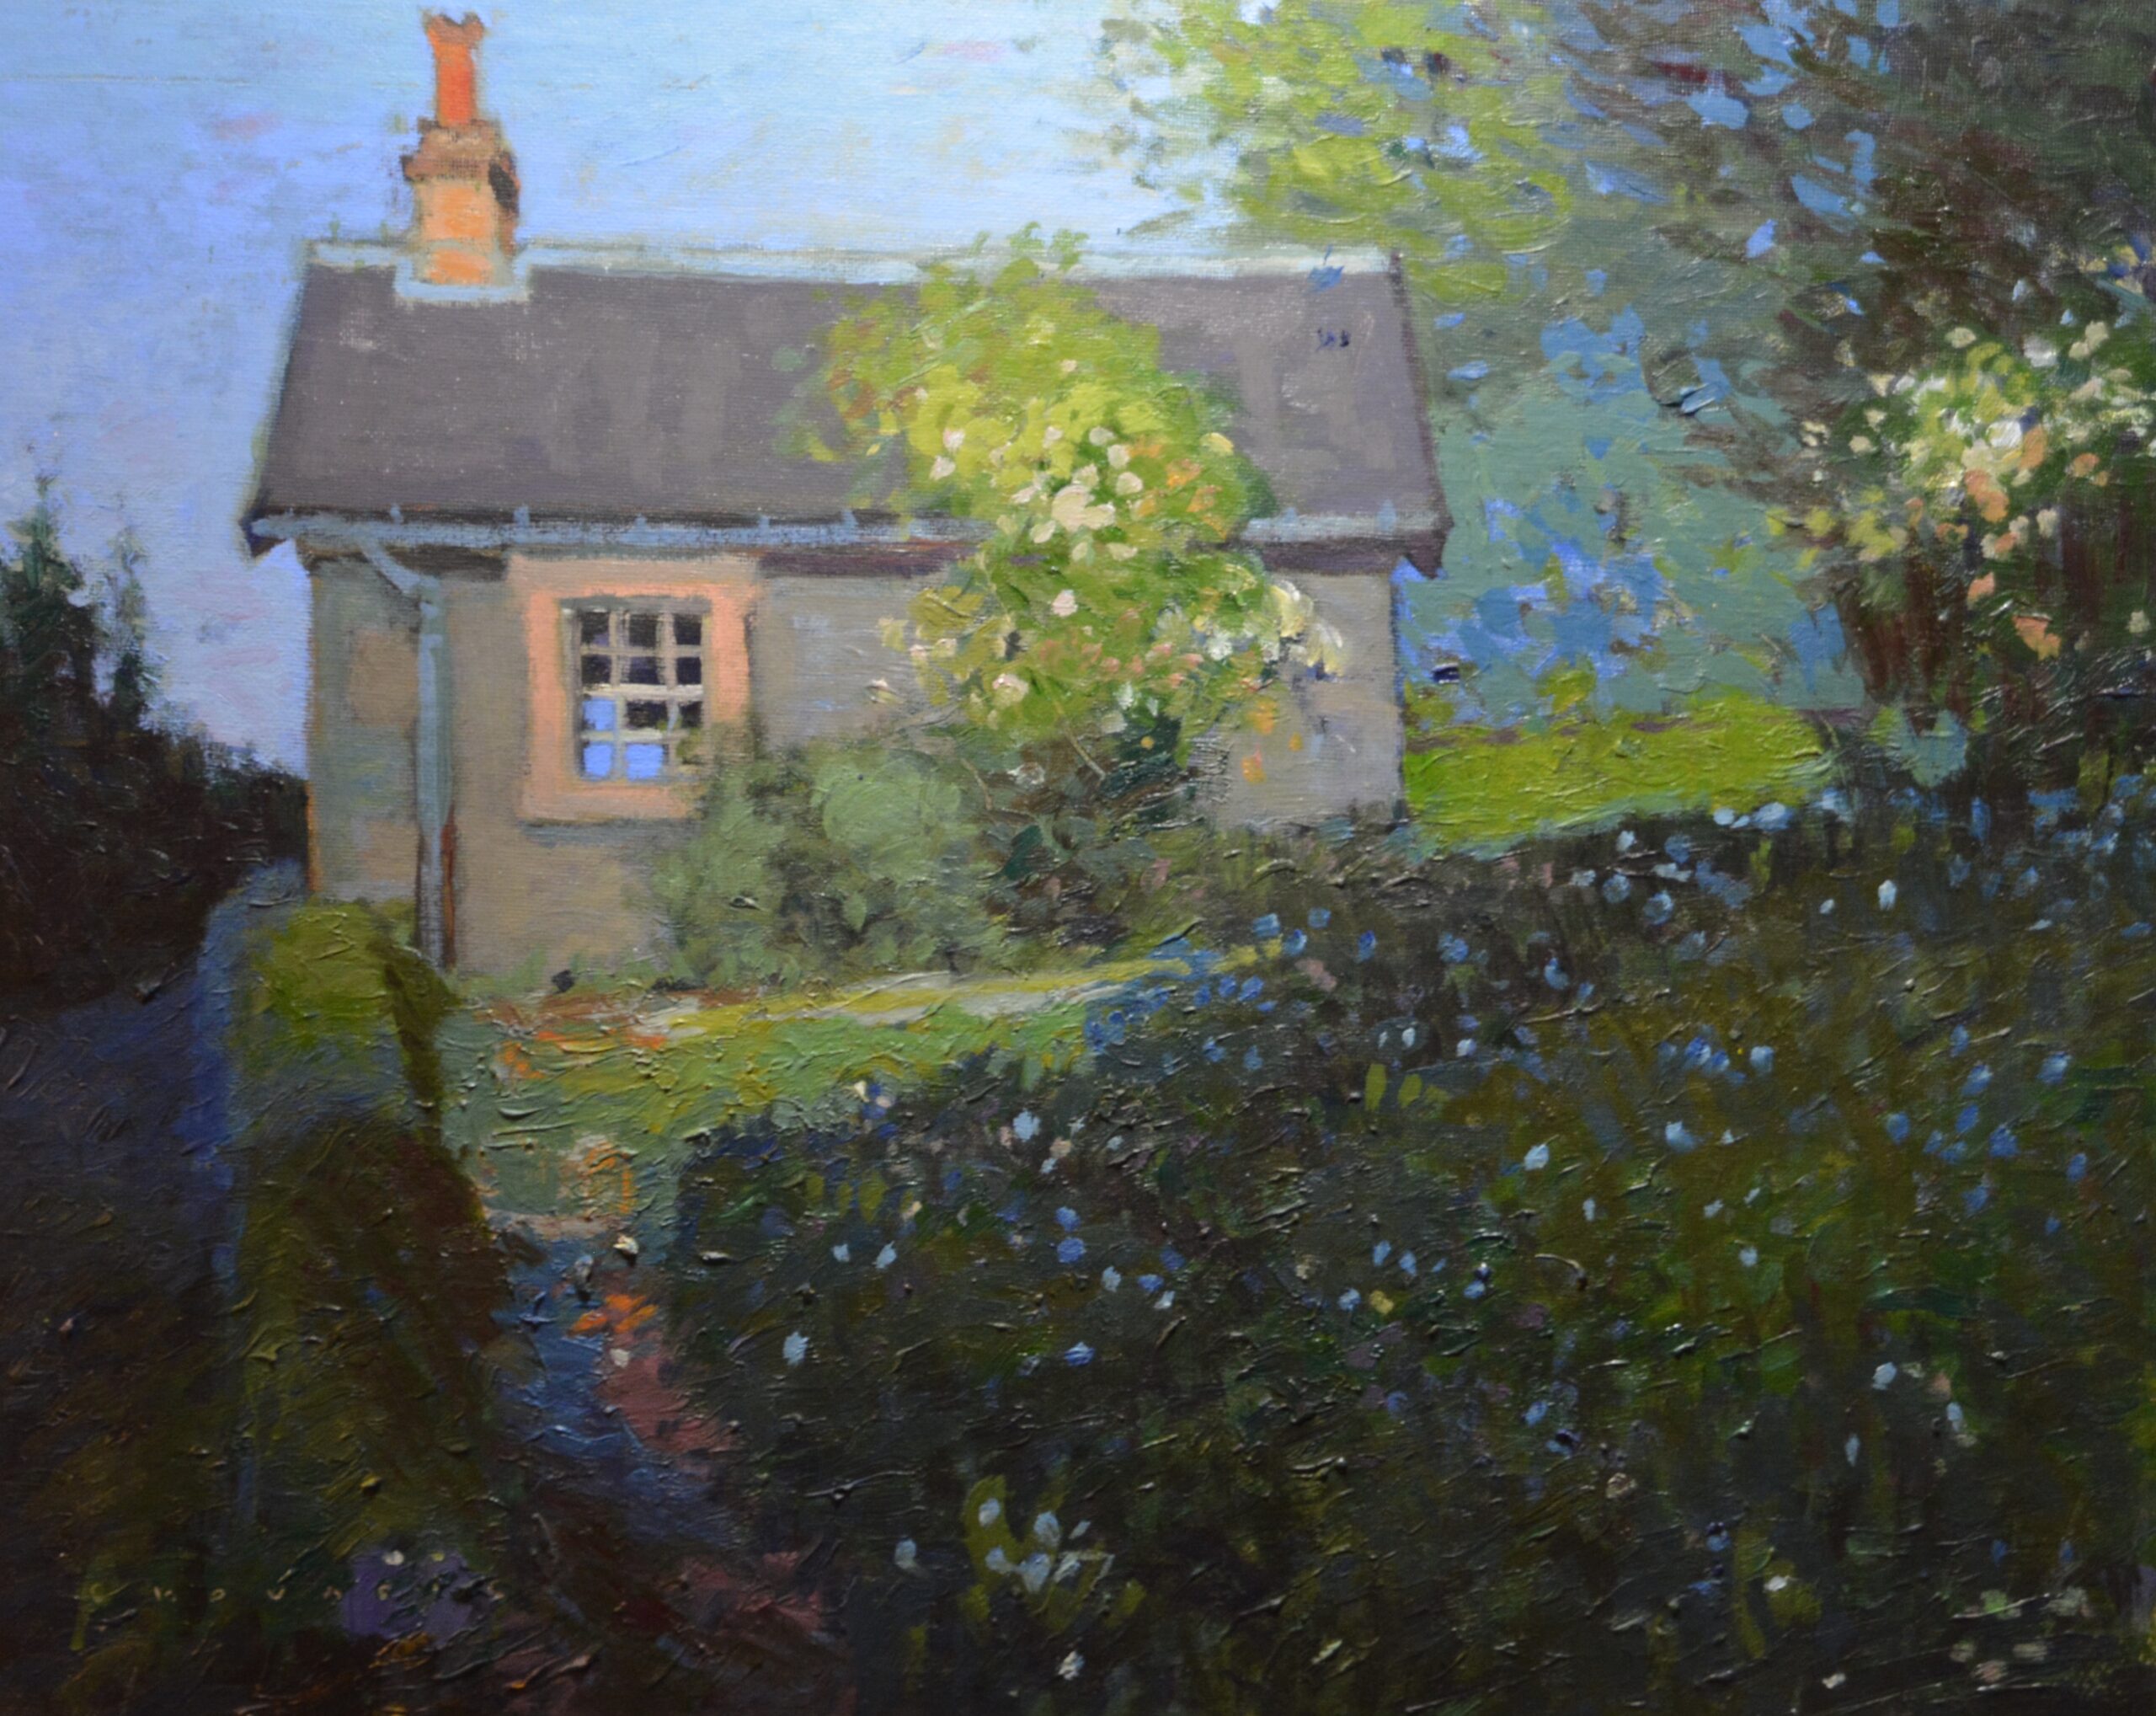 Chuck Kovacic, “Caretakers Cottage at Abbotsford, Scotland,” 2018, oil, 16 x 20 in., Available from artist, Plein air